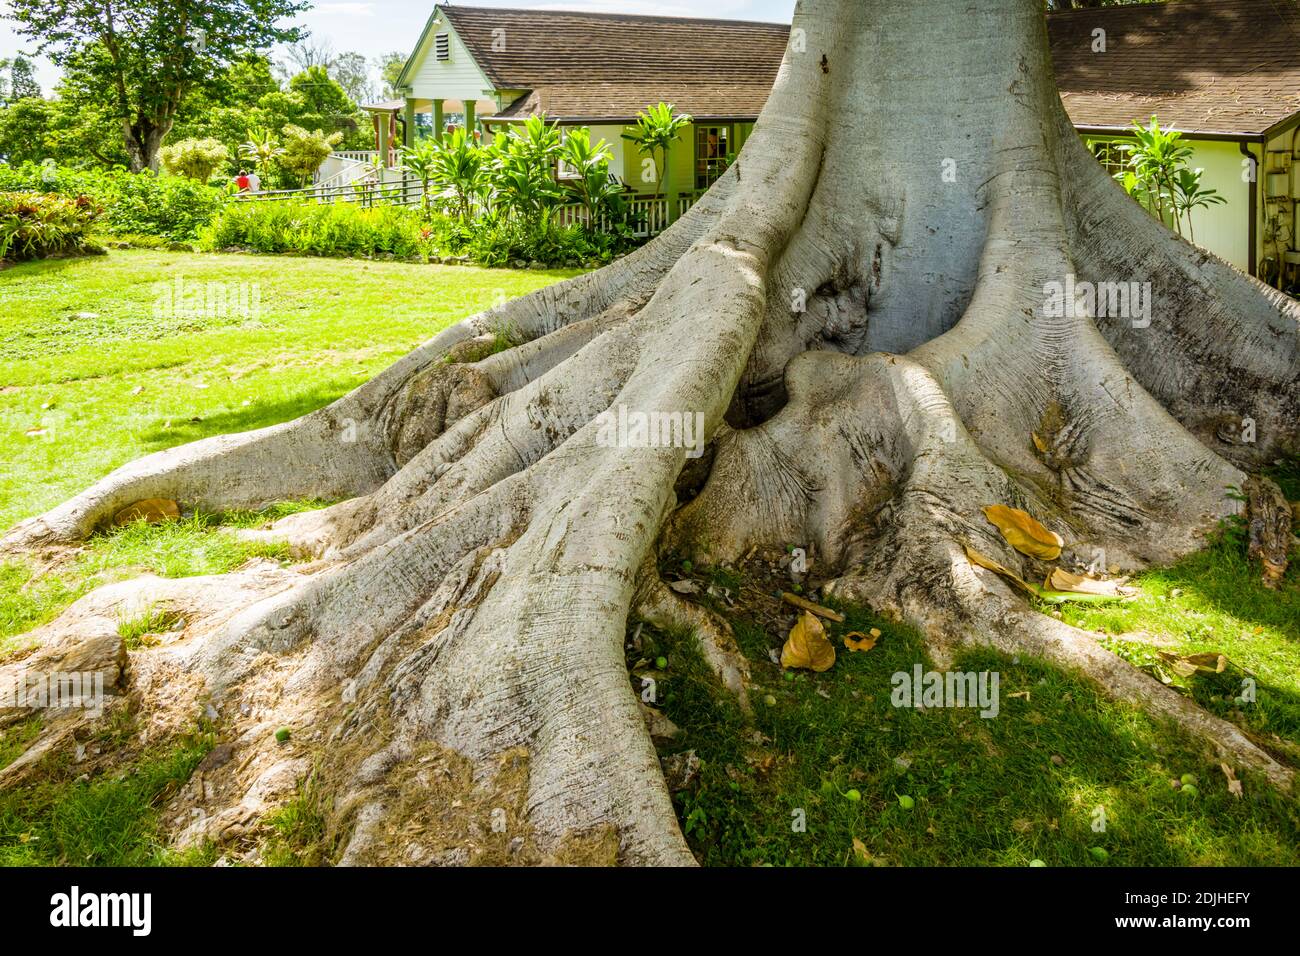 Maui, Hawaii, Upcountry, MauiWine (formerly known as Tedeshi Winery), Ornamental Fig Tree with Huge Roots Stock Photo